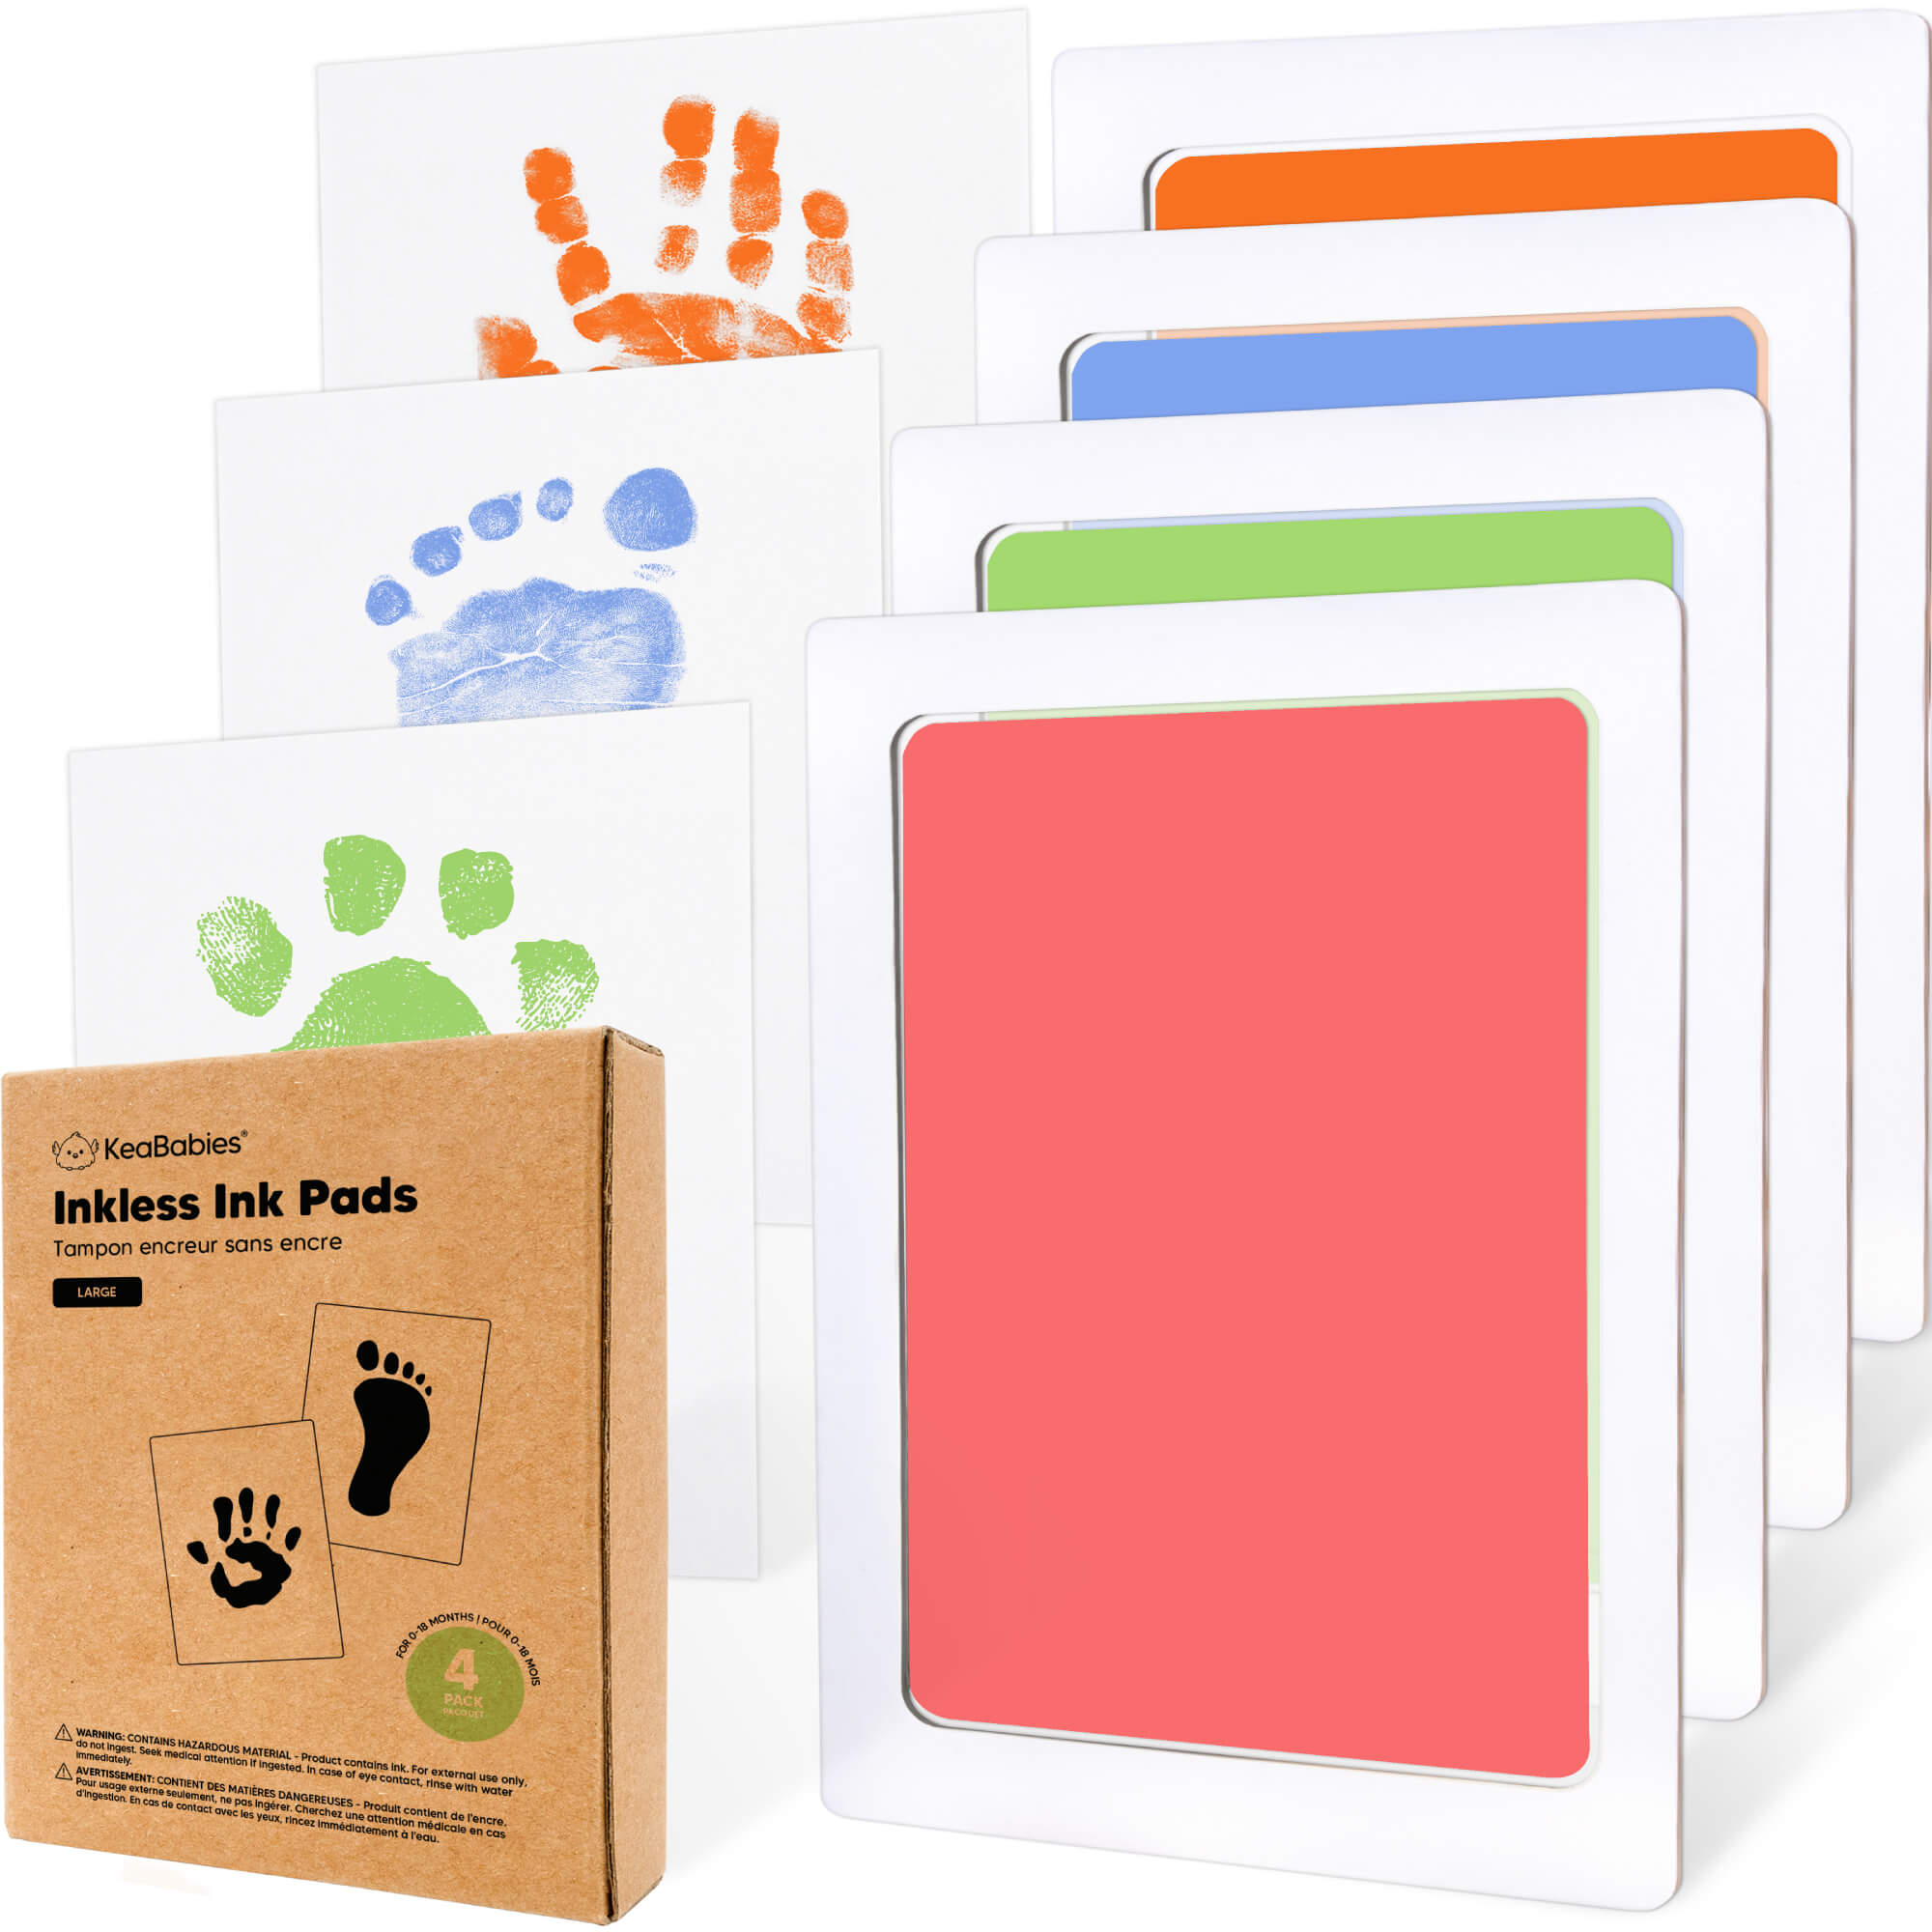 Baby Inkless Clean Touch Ink Pads | KeaBabies